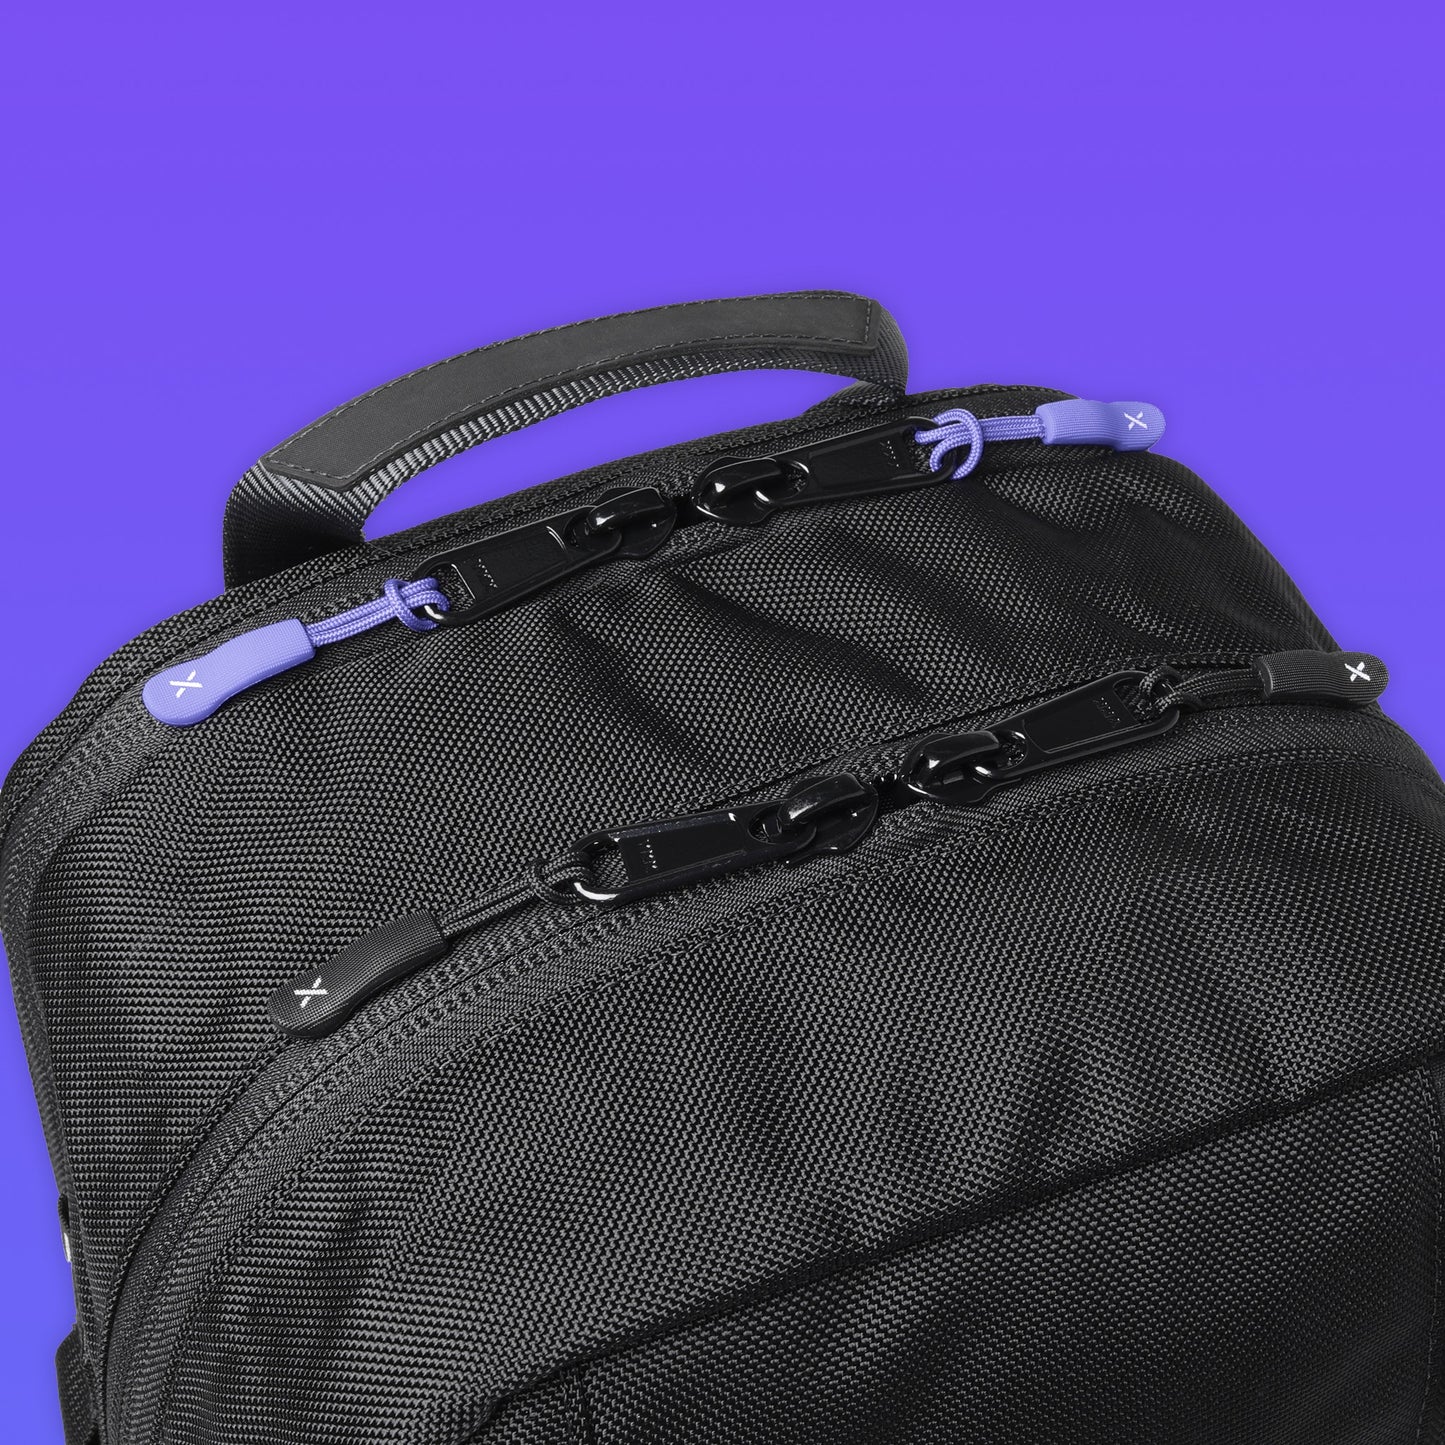 dYdX x DSPTCH Backpack